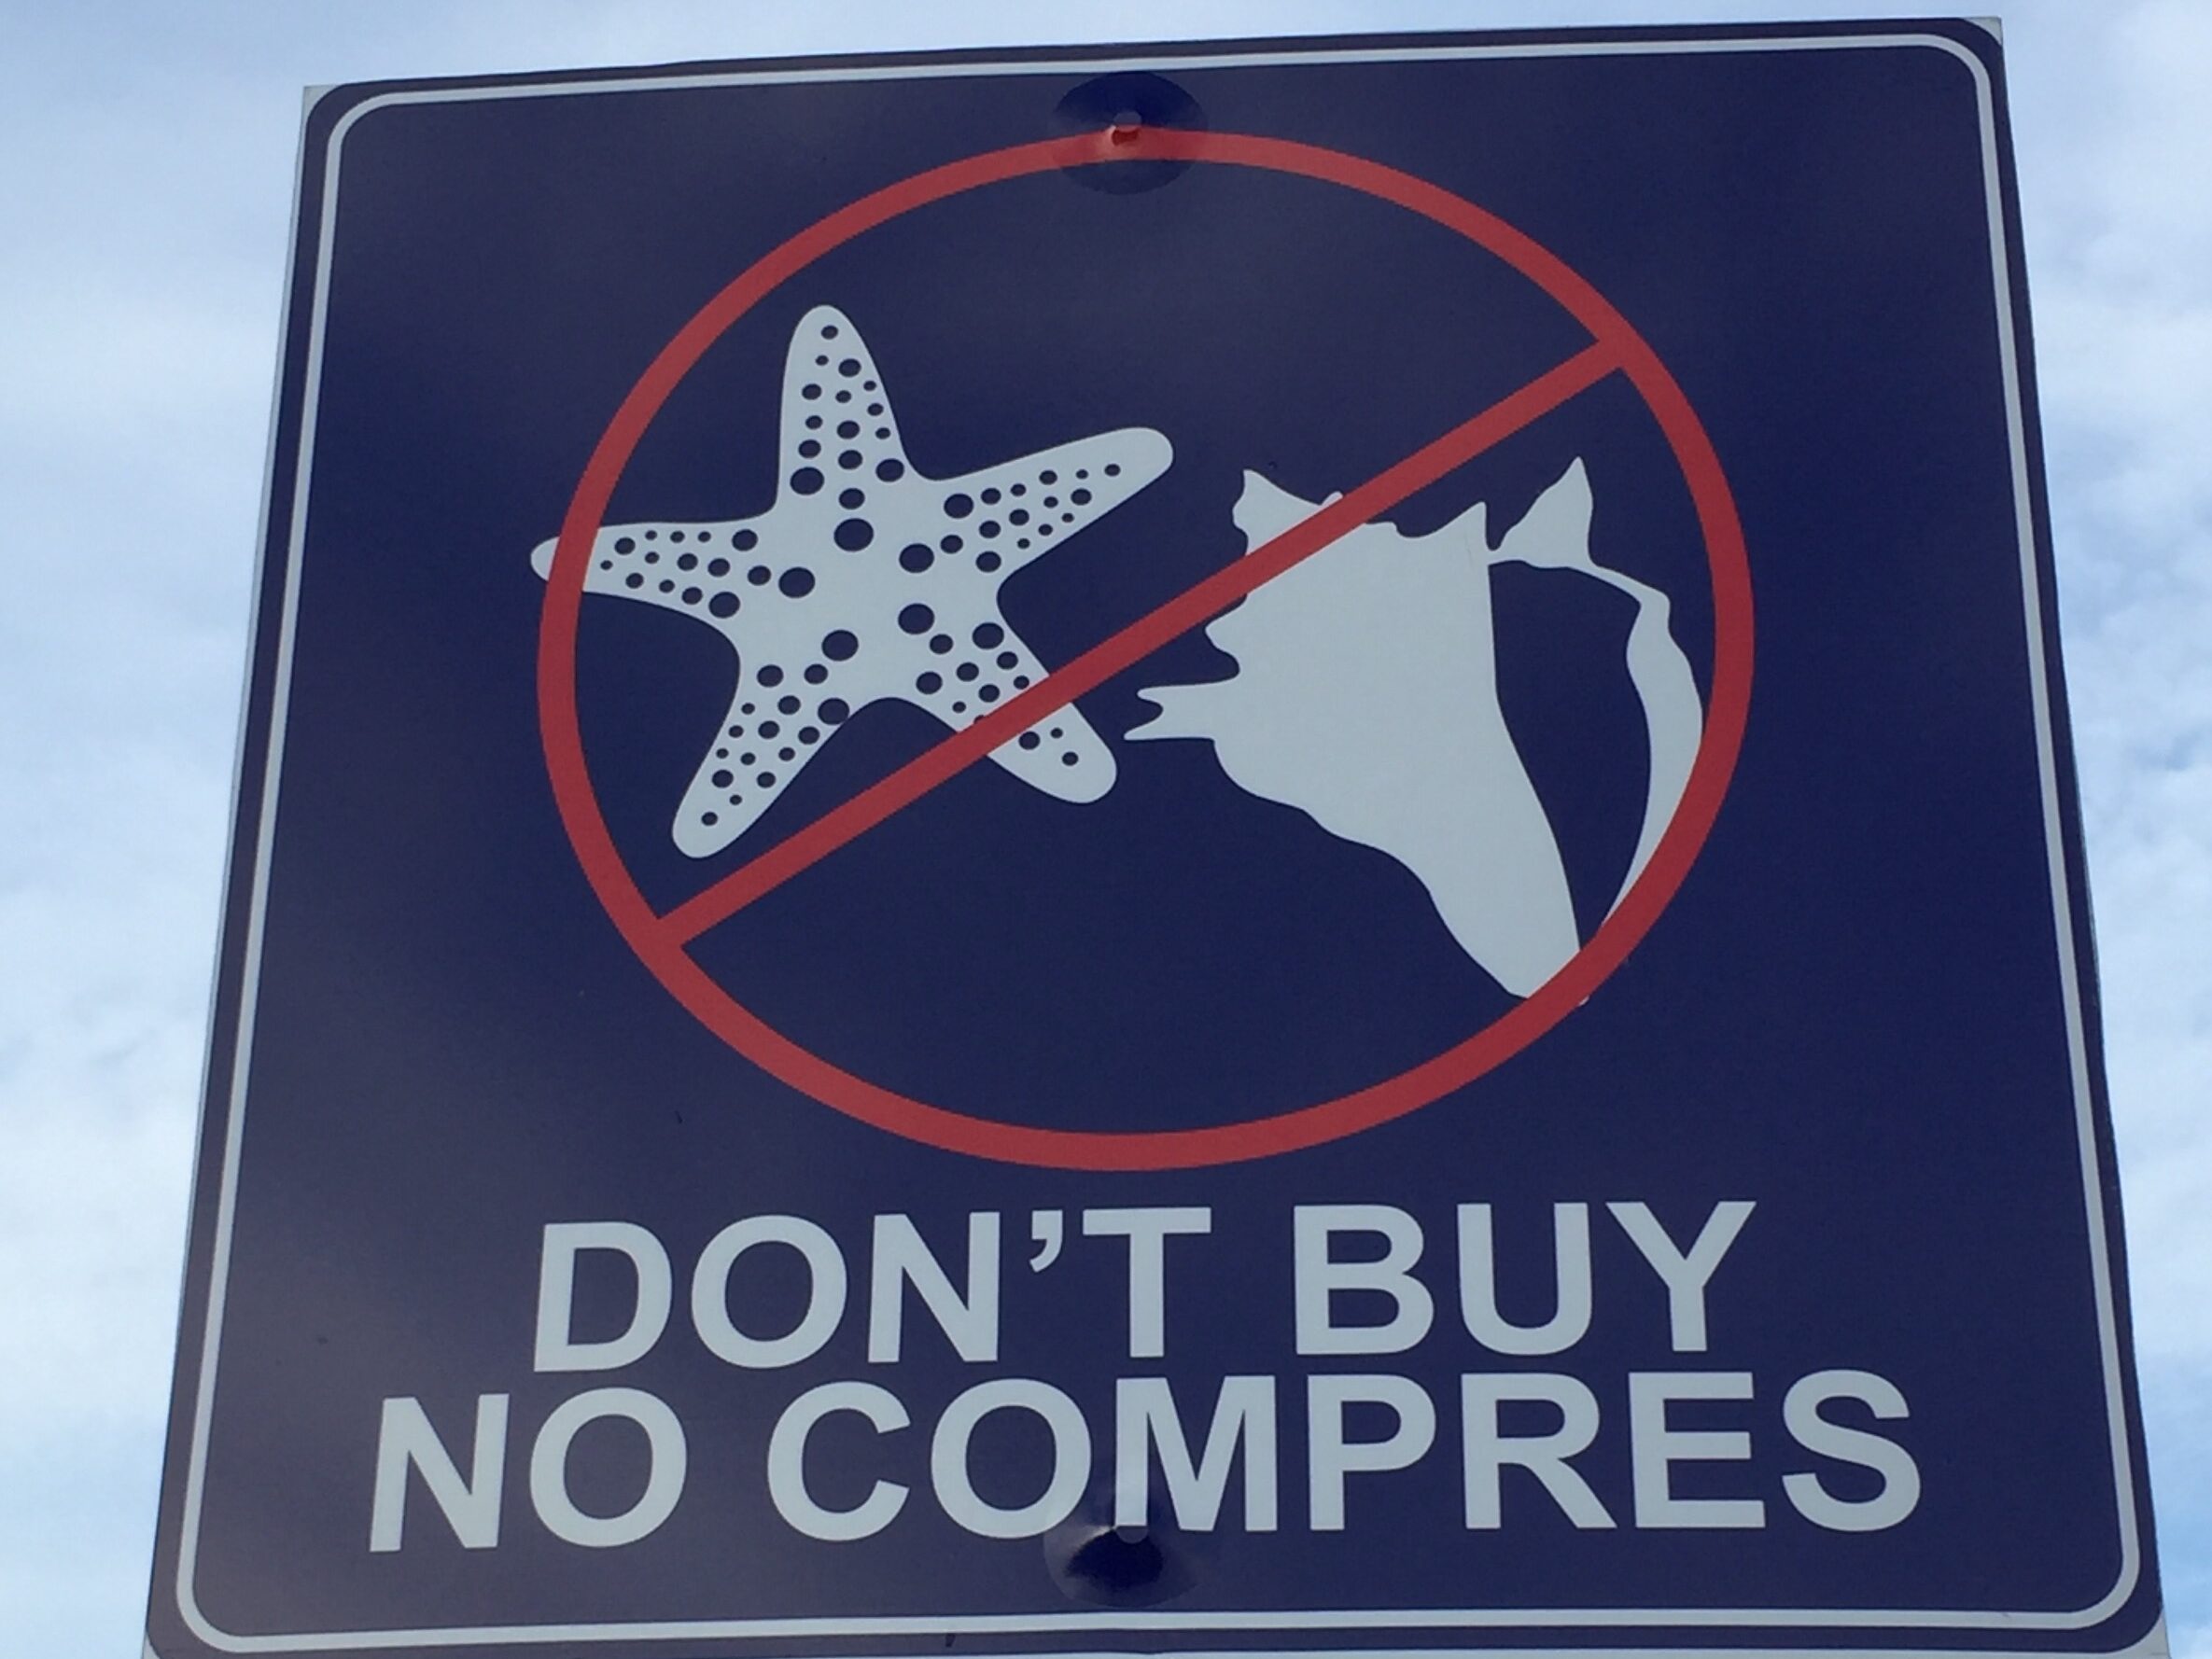 Street sign in Cozumel reminding people not to purchase souvenirs made from dead marine life like sea stars and shells.